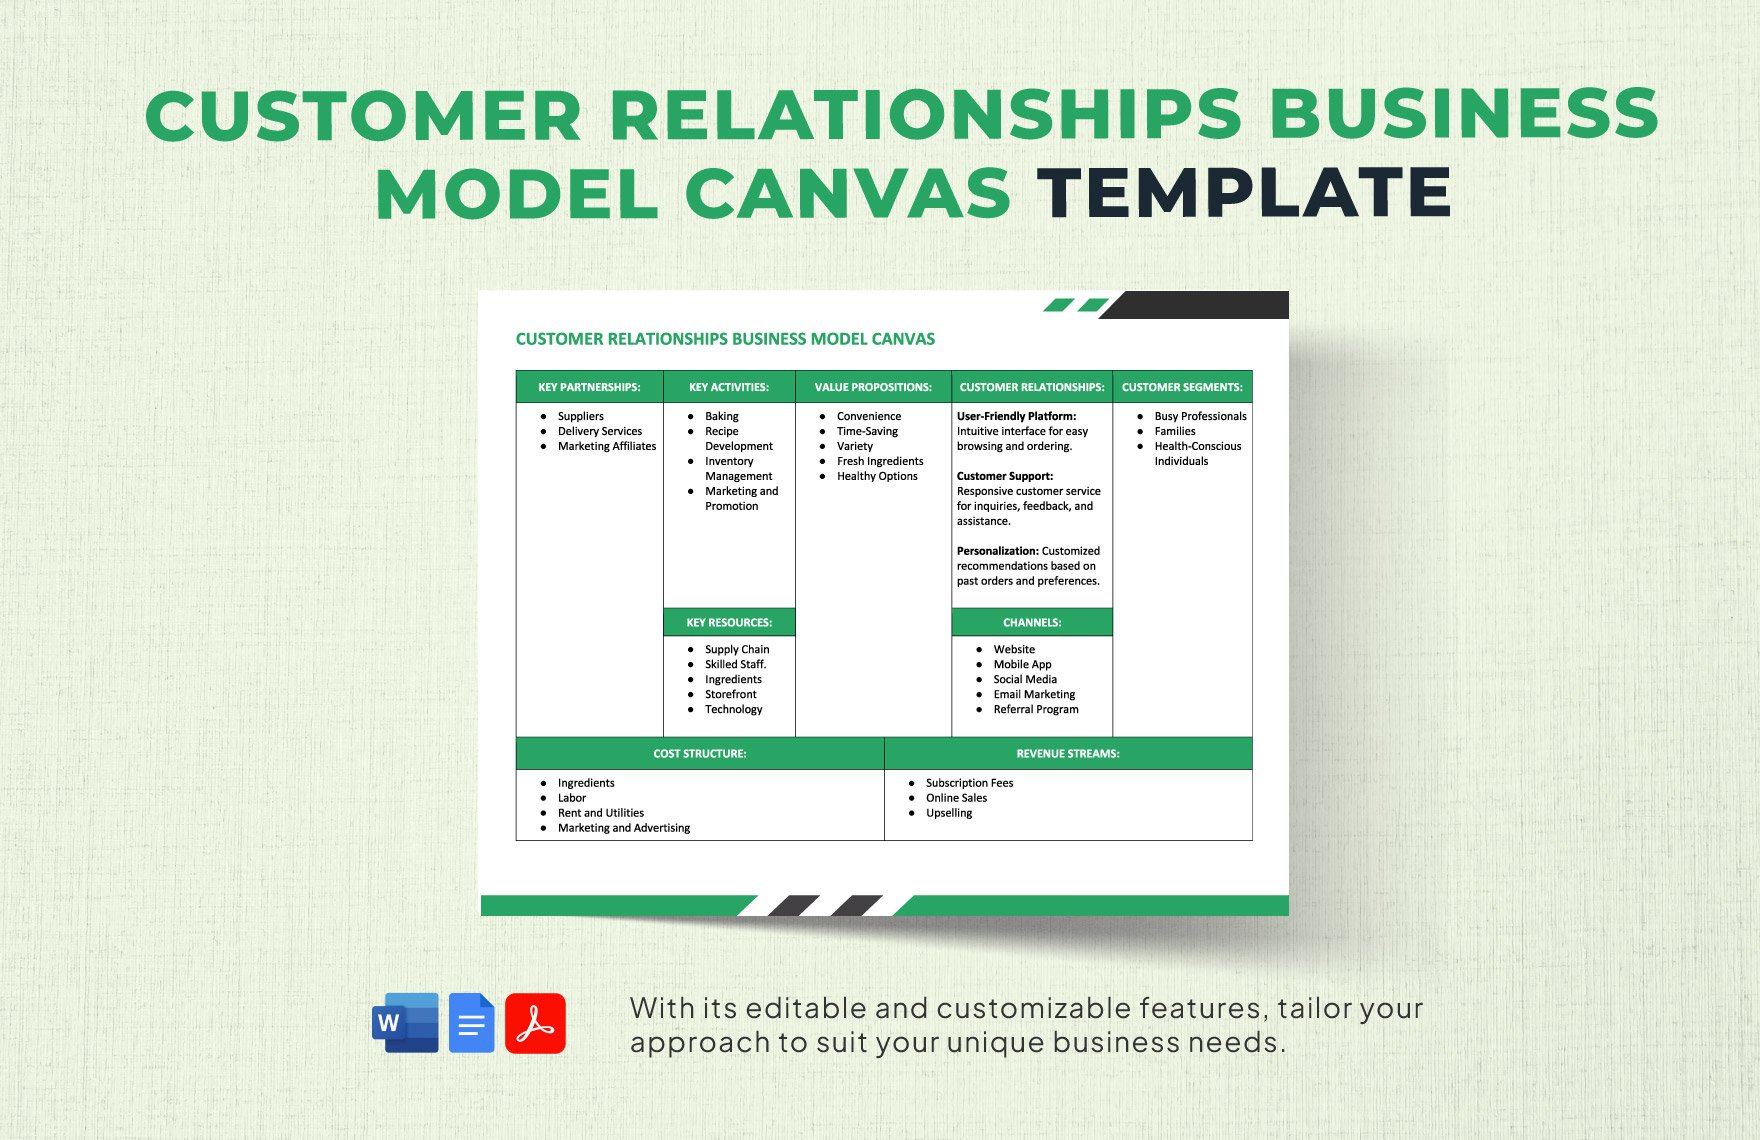 Customer Relationships Business Model Canvas Template